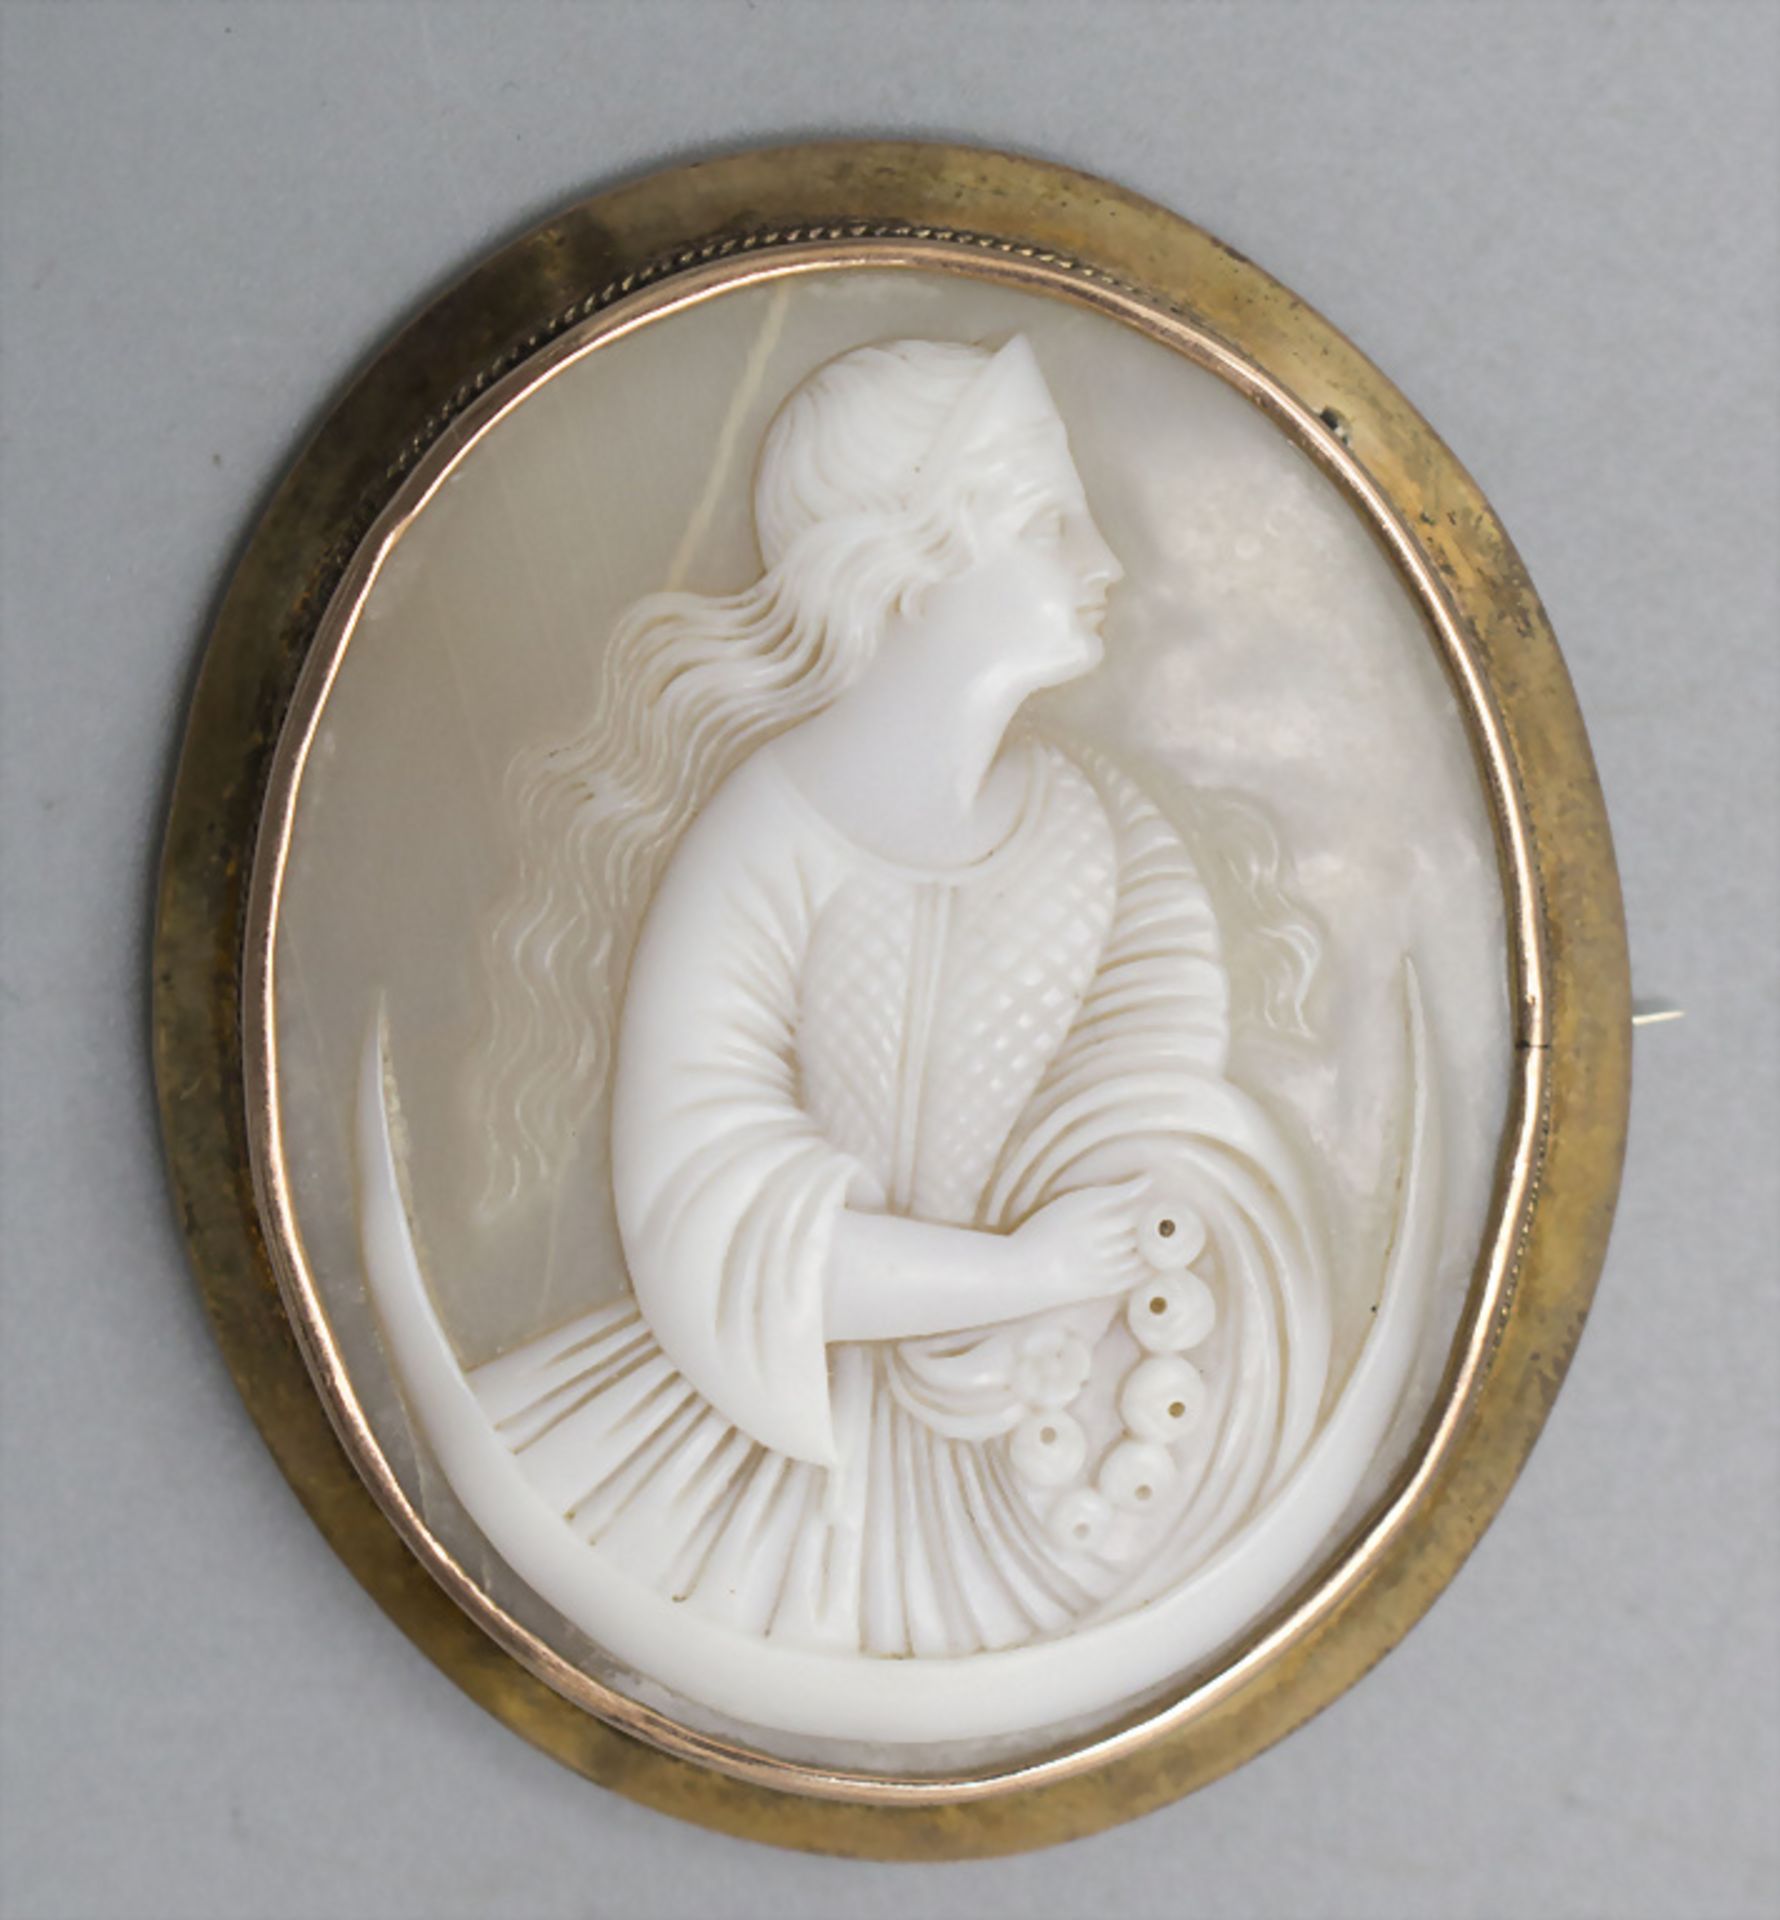 Kamee Anhänger / An 9 ct gold pendant with cameo, 19. Jh.